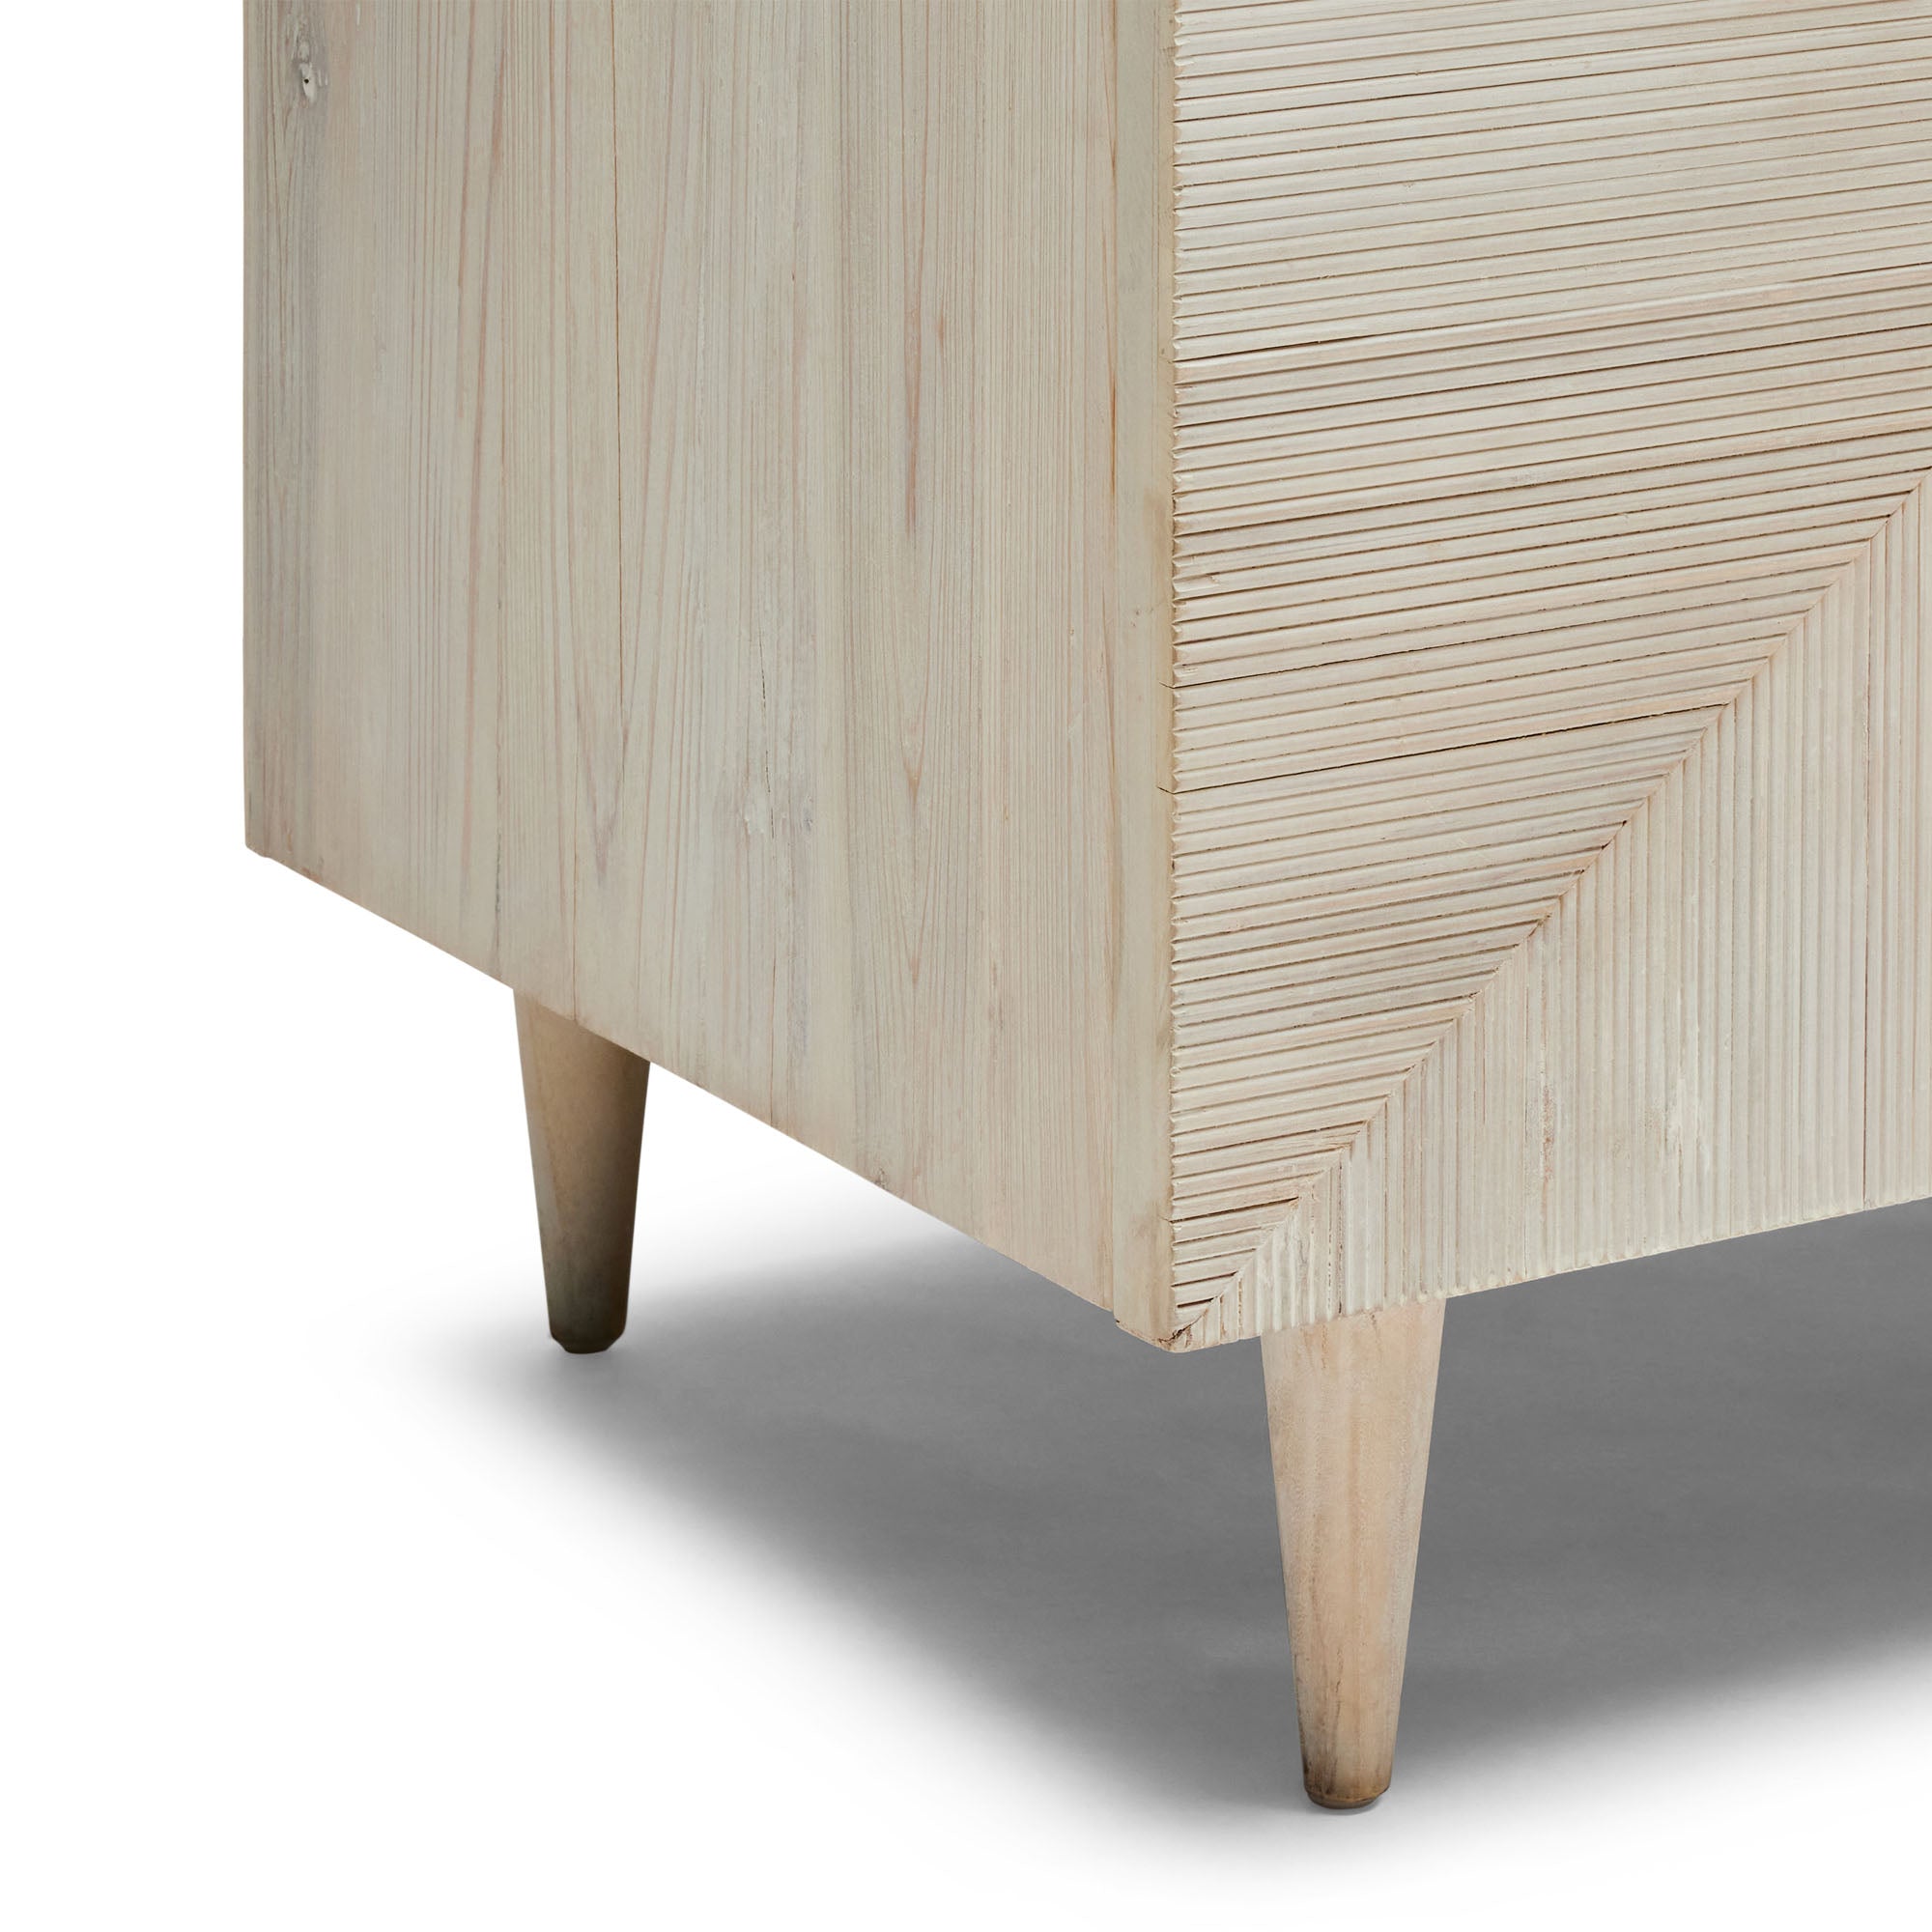 Stanford Recycled Pine Sideboard